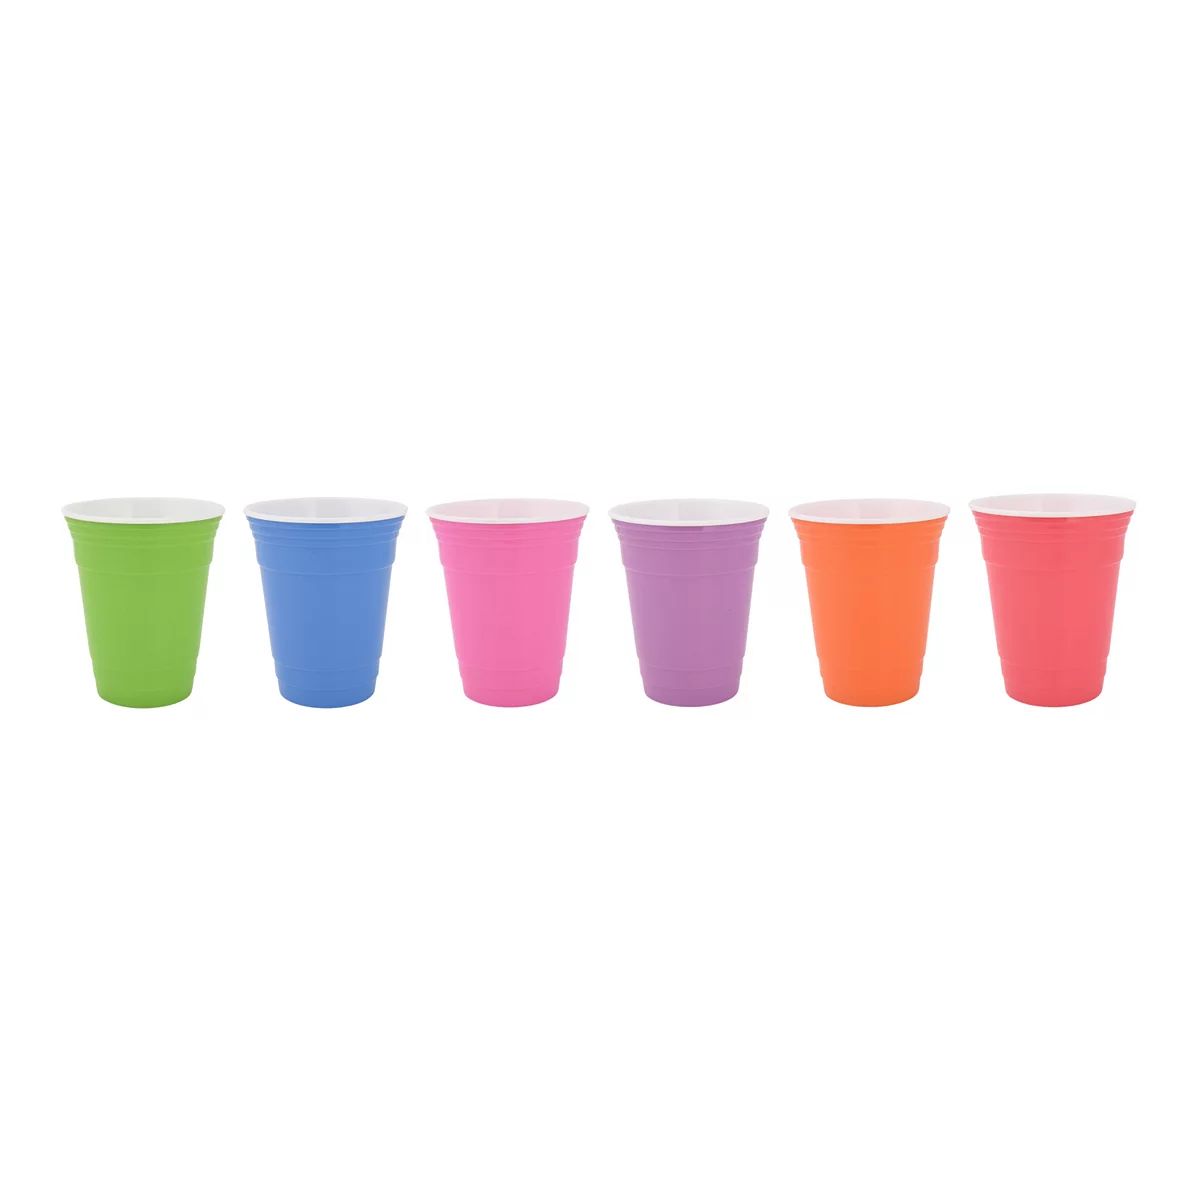 Celebrate Together Summer Plastic Reusable Party Cups 6-Piece Set | Kohl's